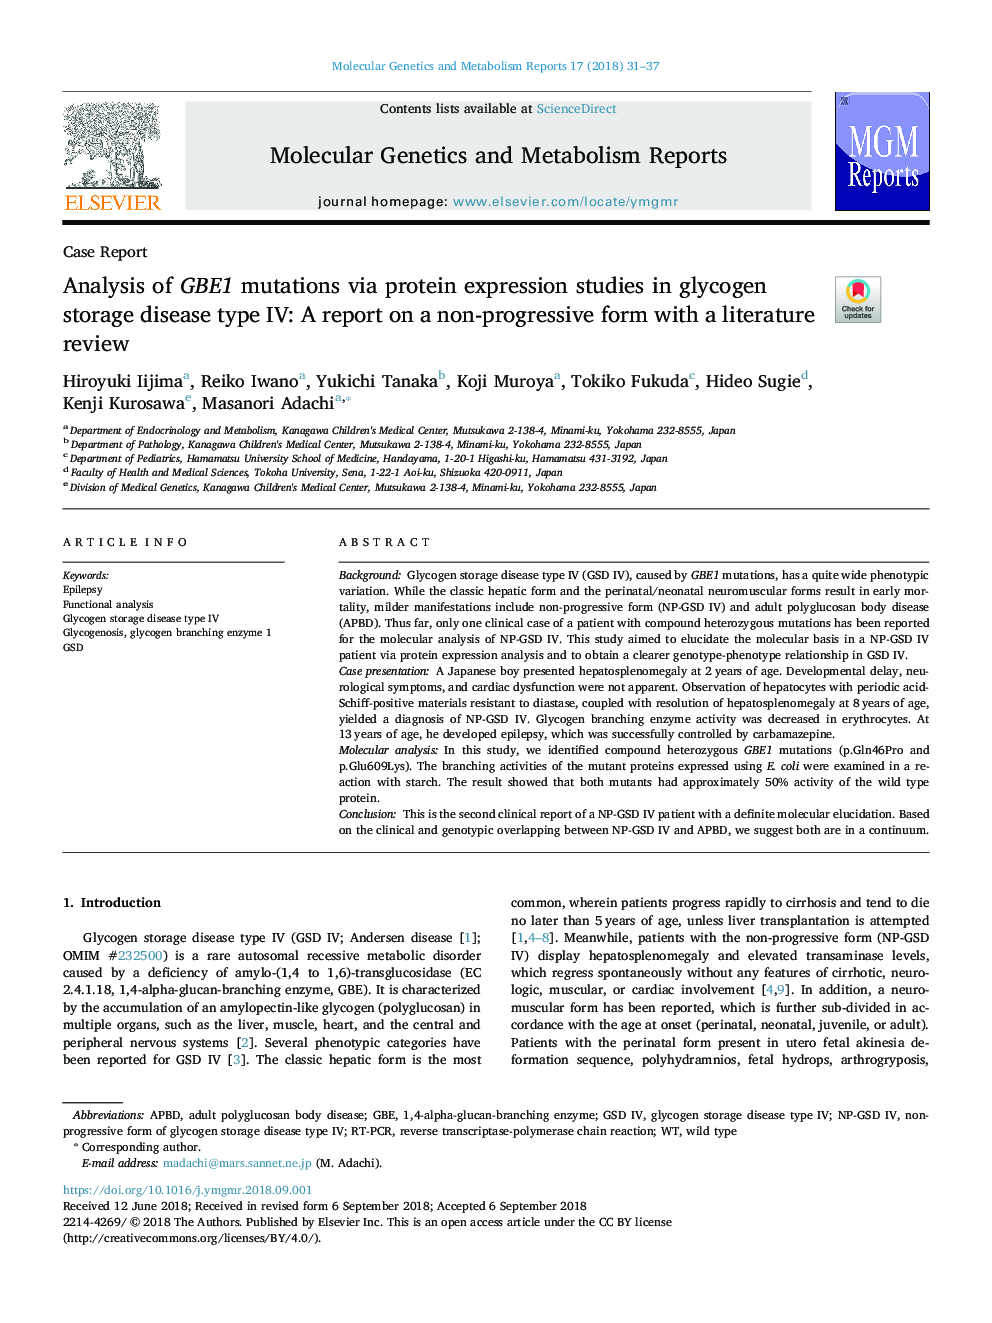 Analysis of GBE1 mutations via protein expression studies in glycogen storage disease type IV: A report on a non-progressive form with a literature review